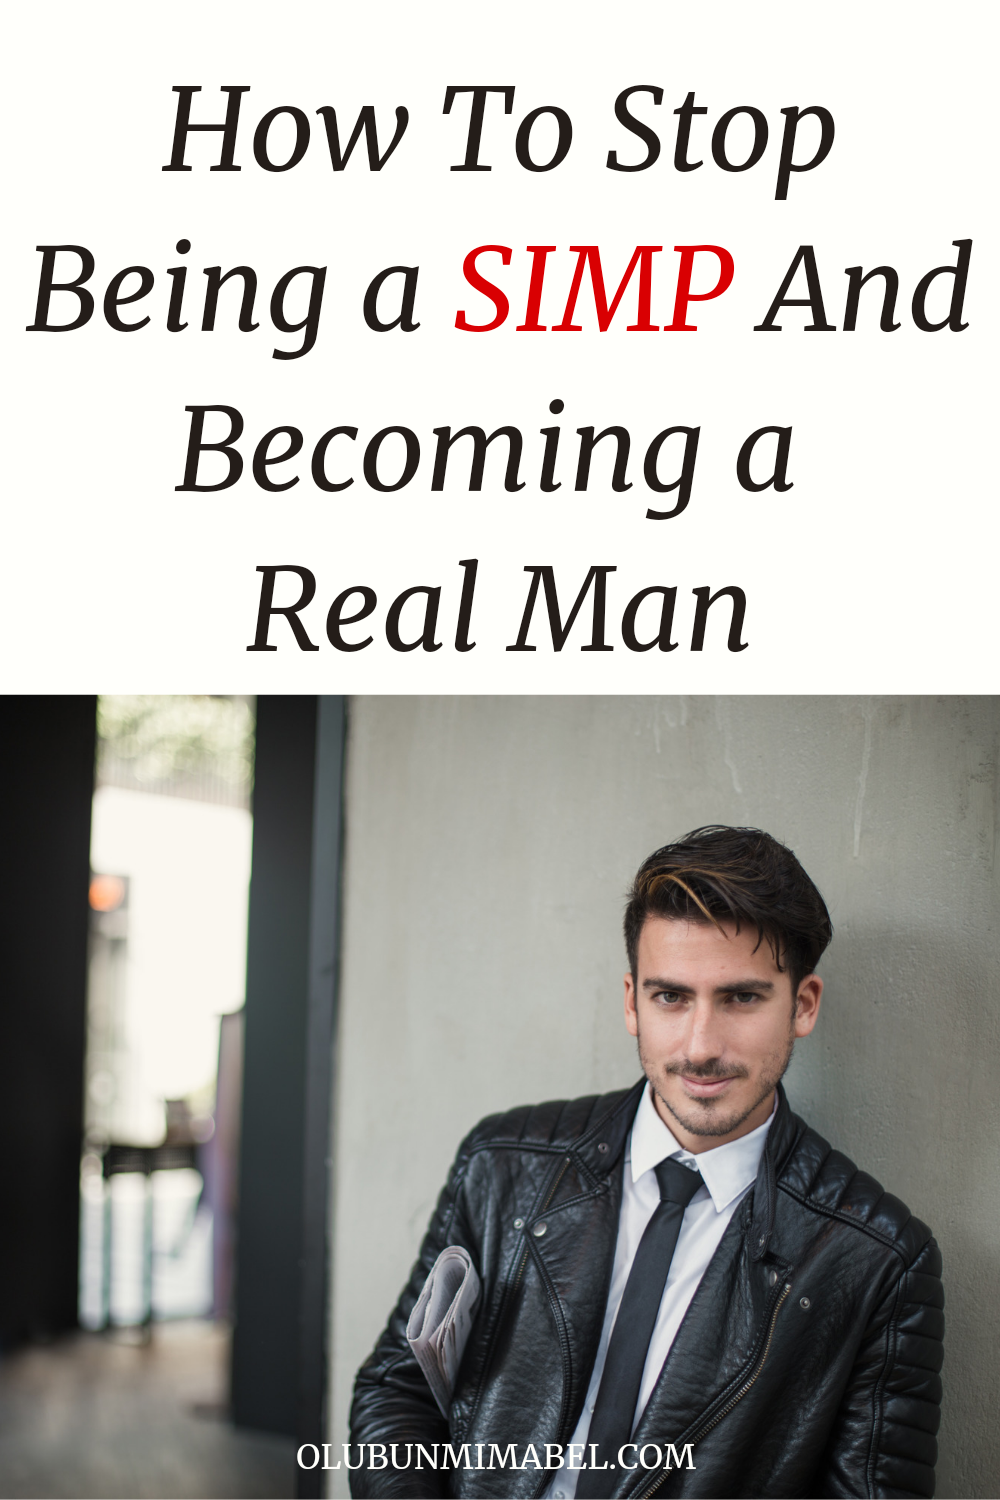 How To Stop Being a Simp in a Relationship